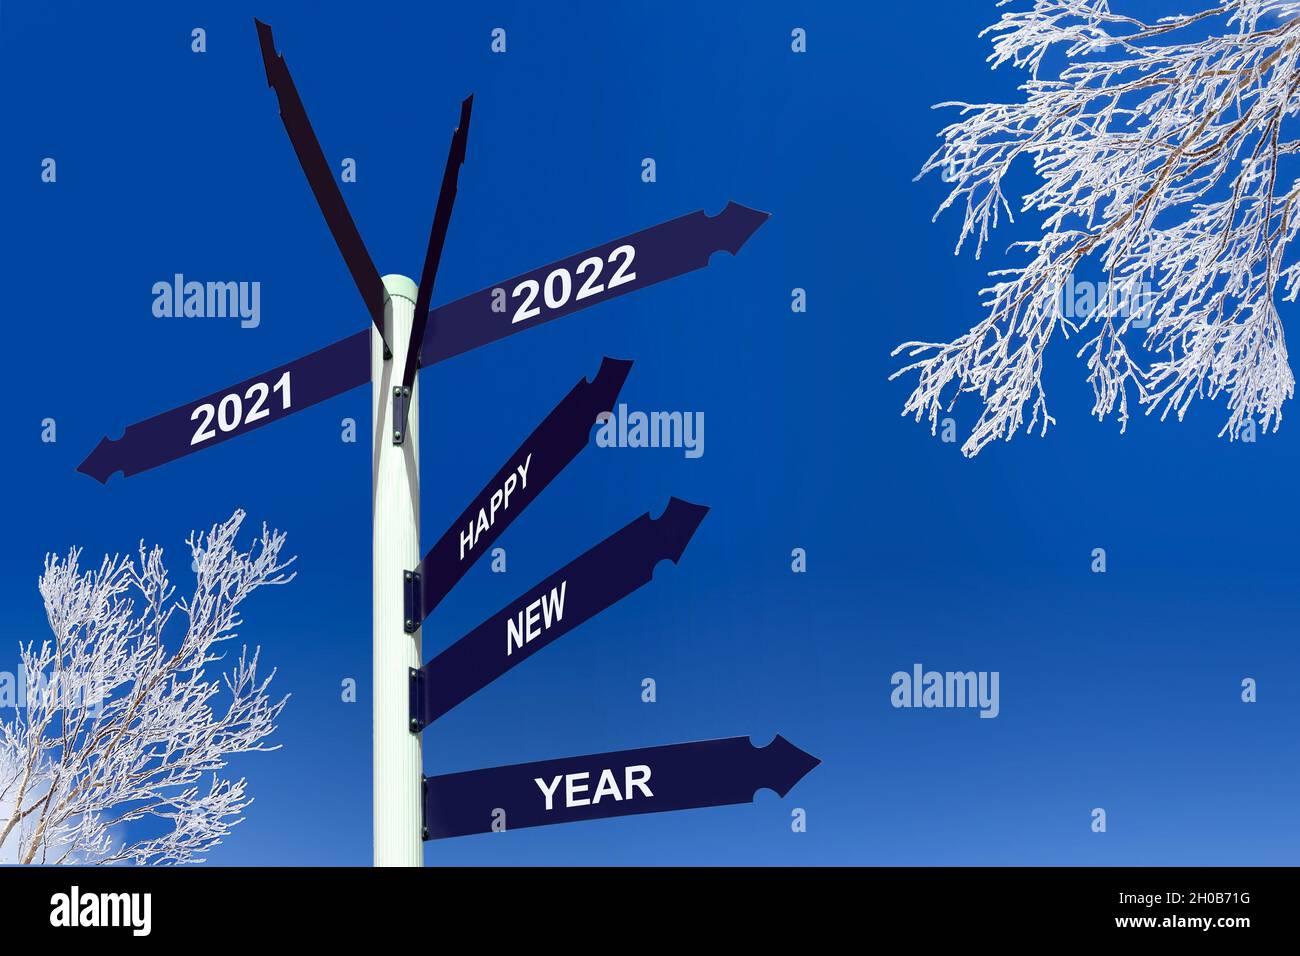 Happy new year 2022 on direction panels, snowy trees, winter greetings Stock Photo